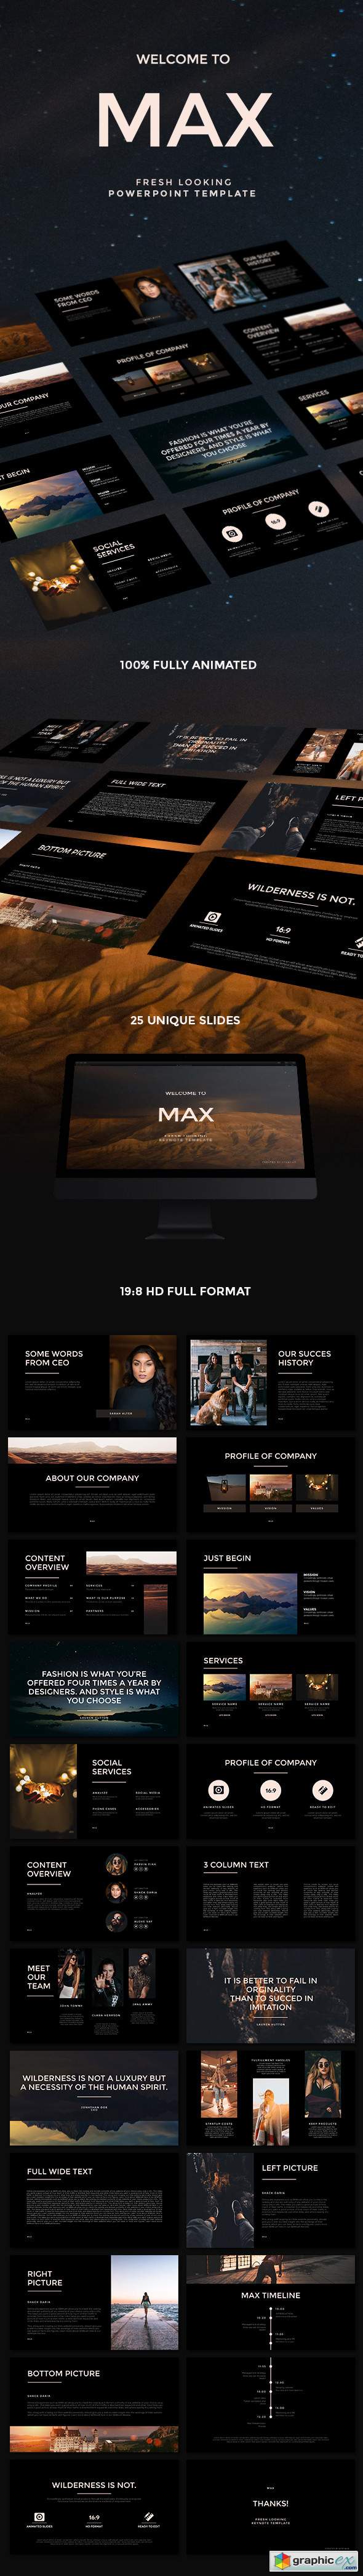 MAX Fresh Looking PowerPoint Template